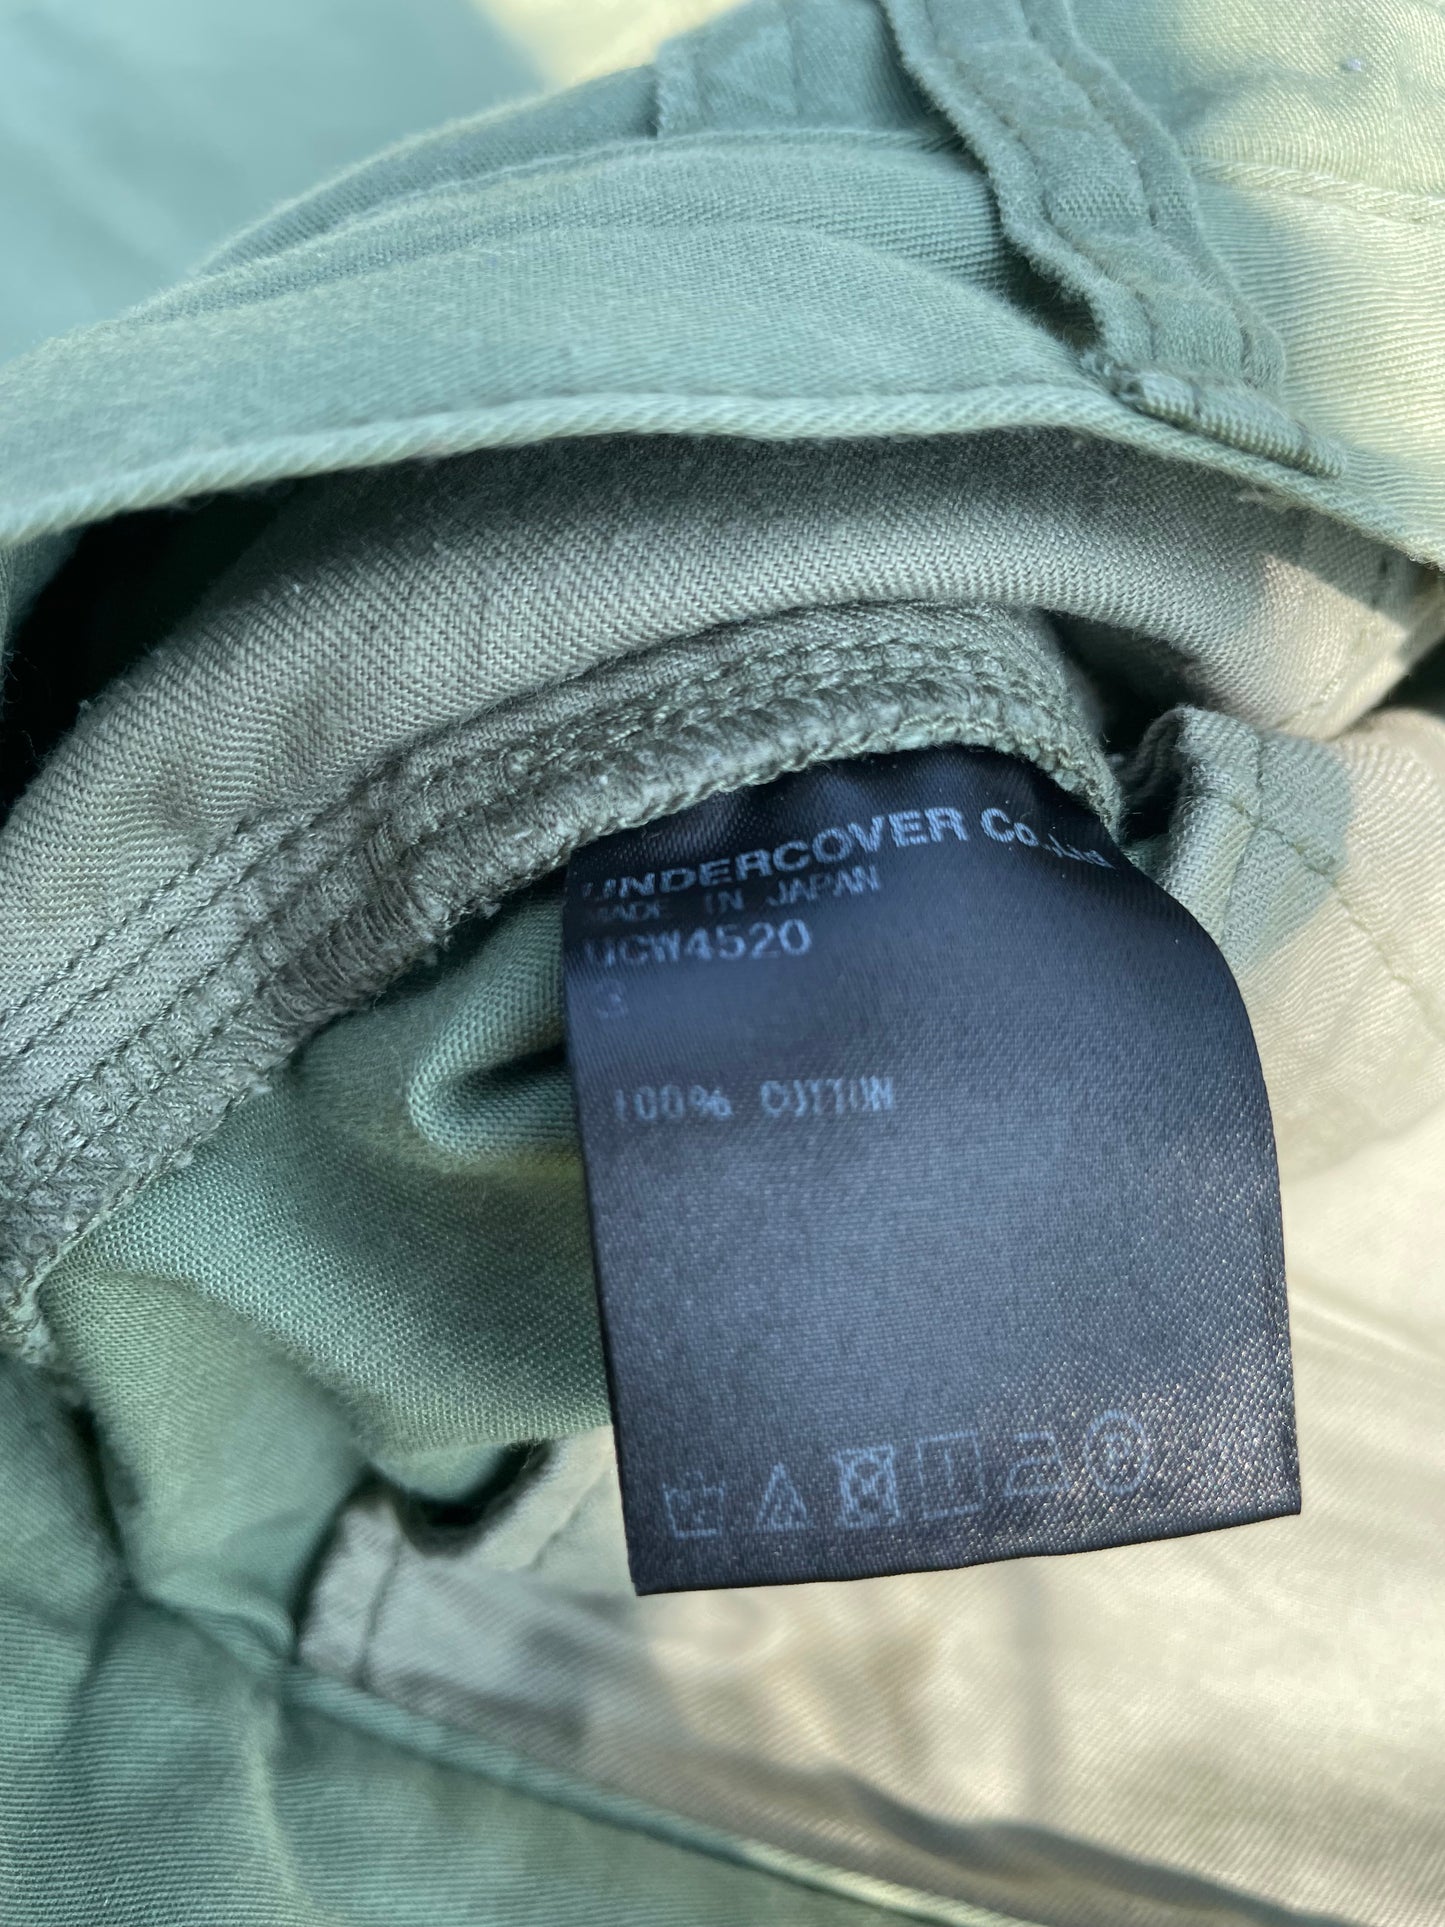 SS19 Undercover Cargo Pockets Olive Shorts